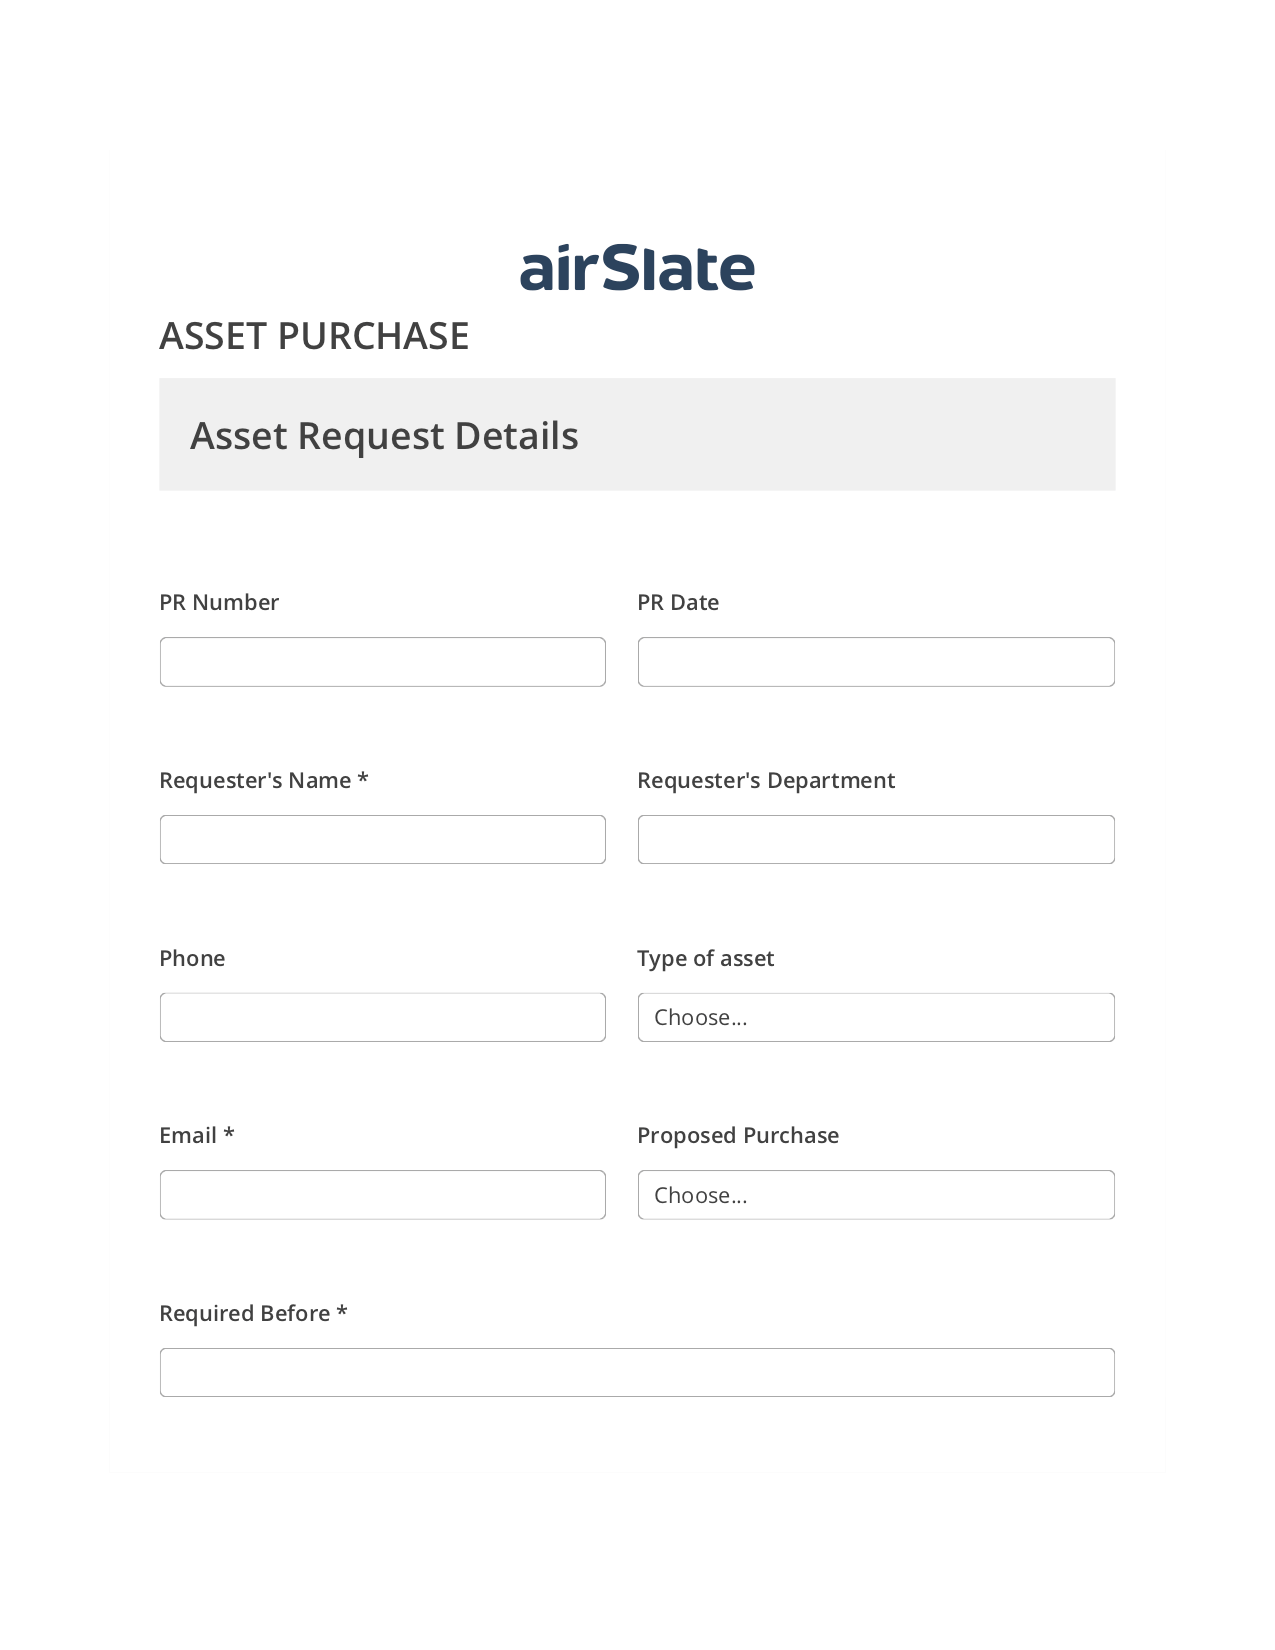 Asset Purchase Flow Archive to SharePoint Folder Bot